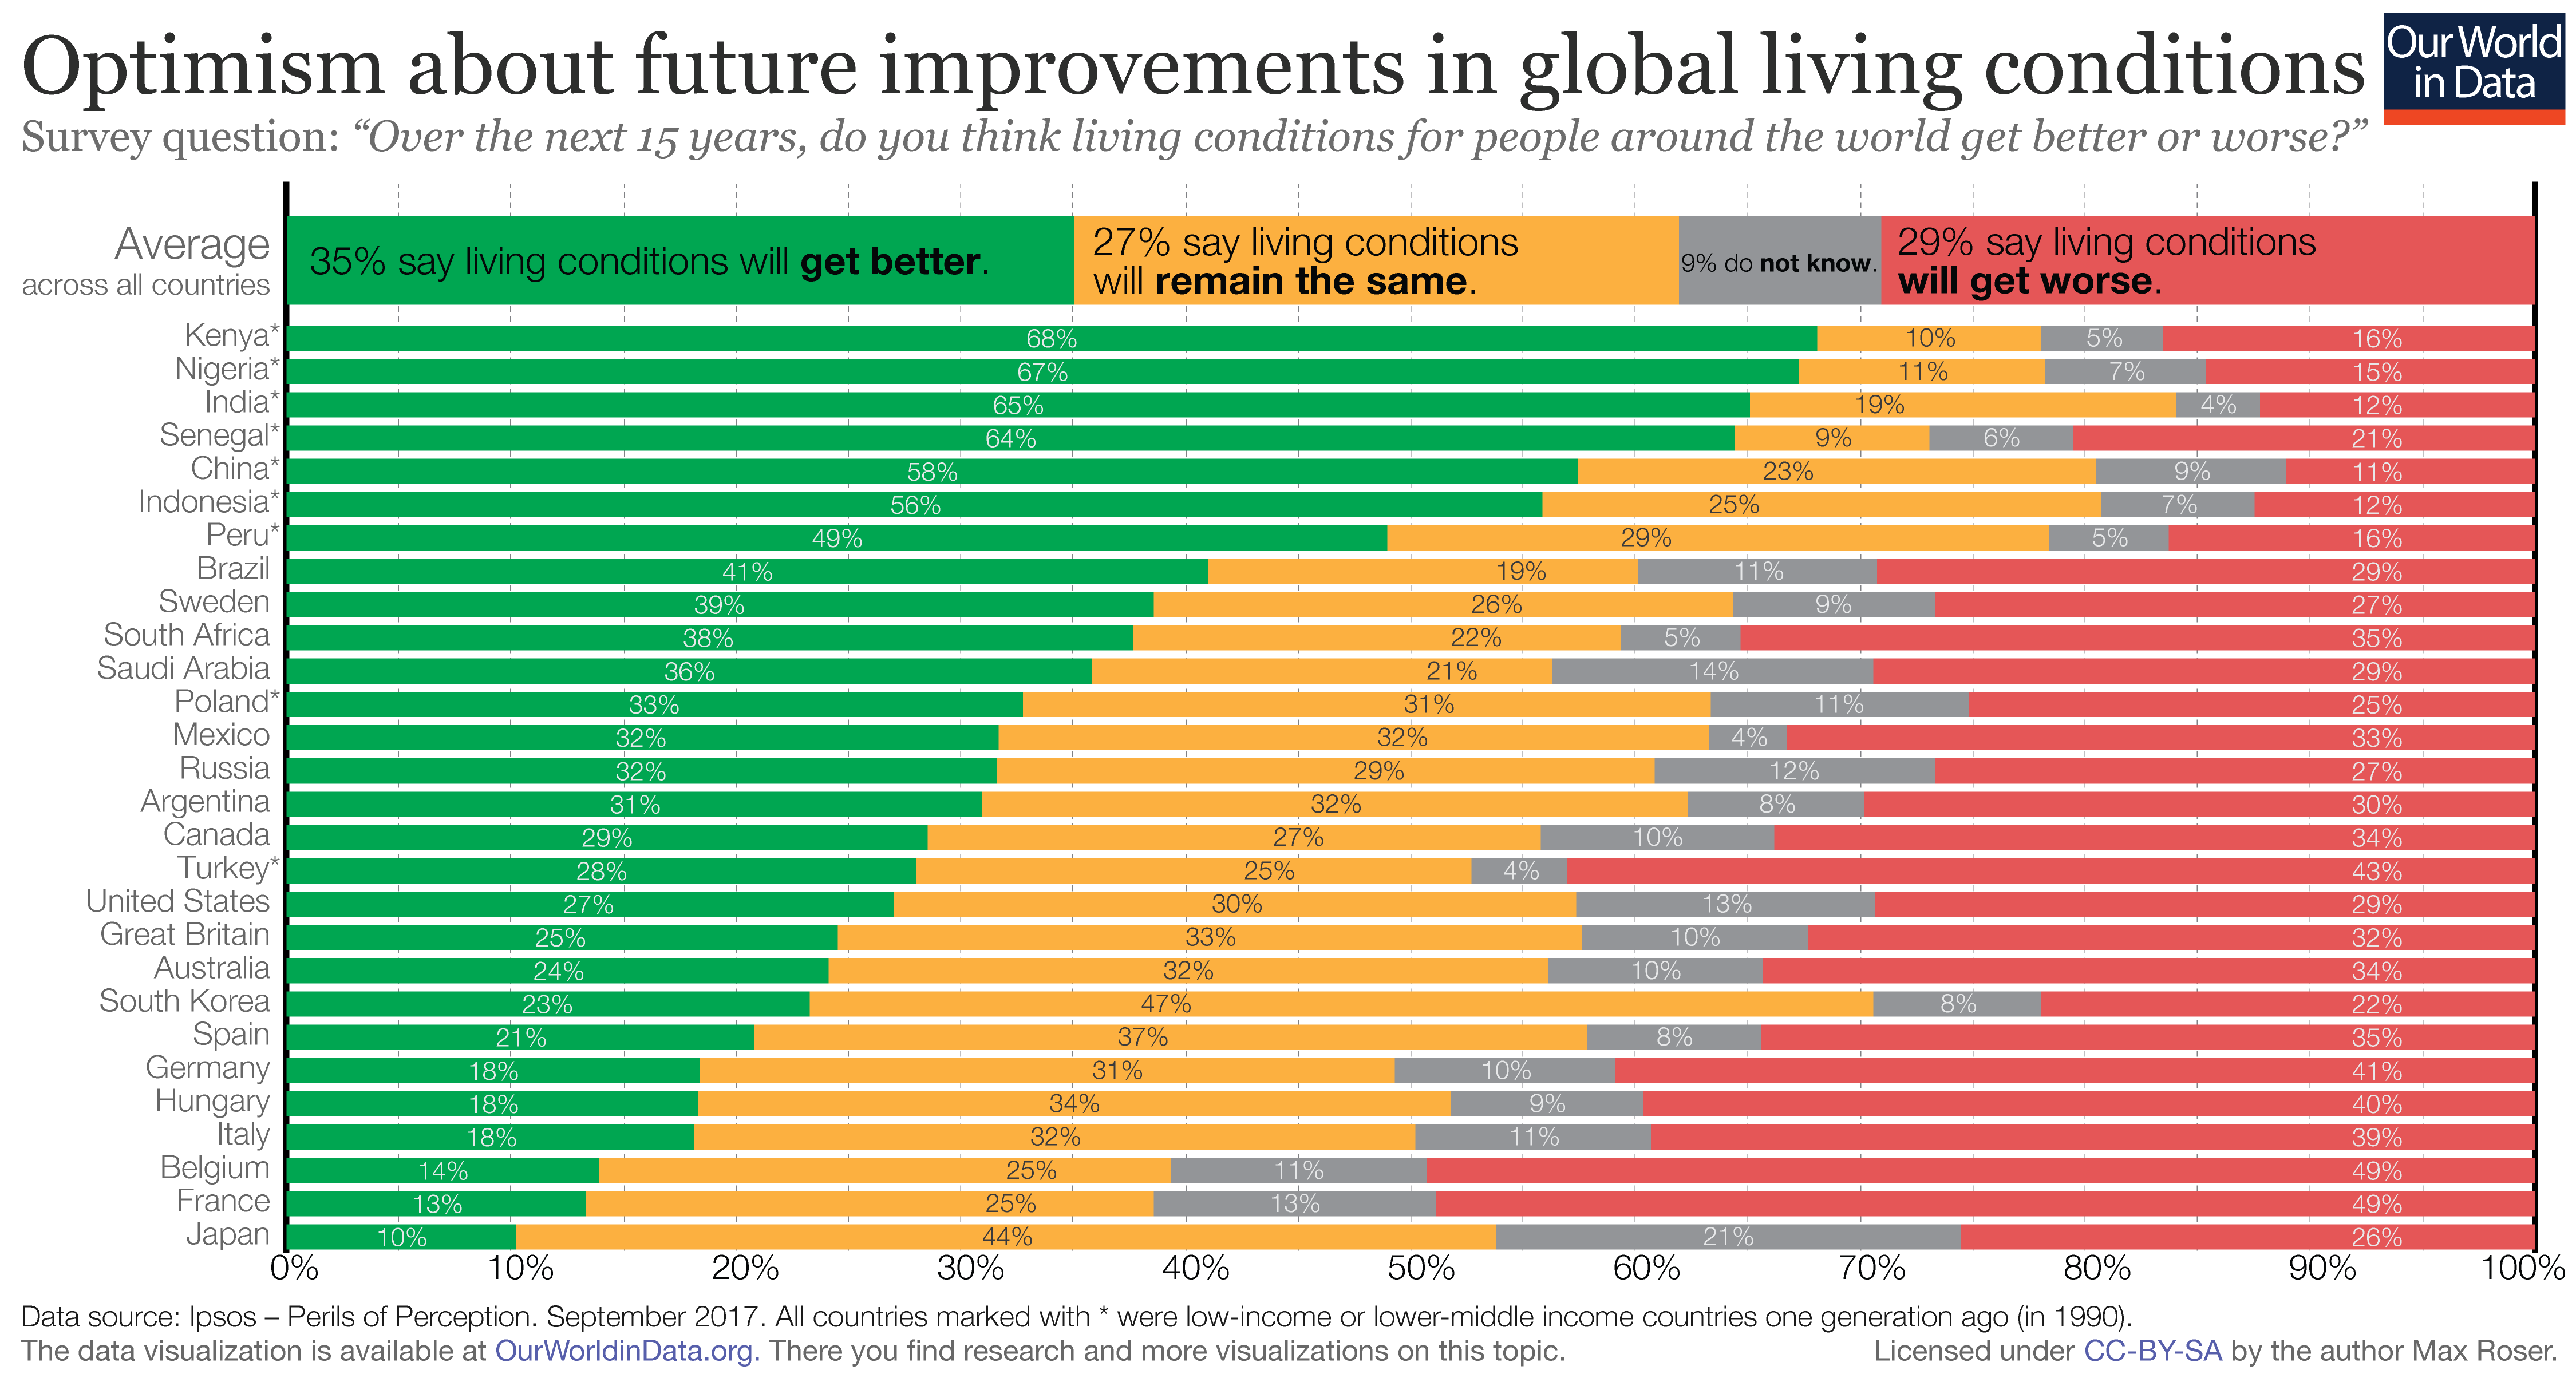 Stacked bar chart of the share of people that think the future will be better or worse by country showing that especially in rich countries, most think the world will be worse.